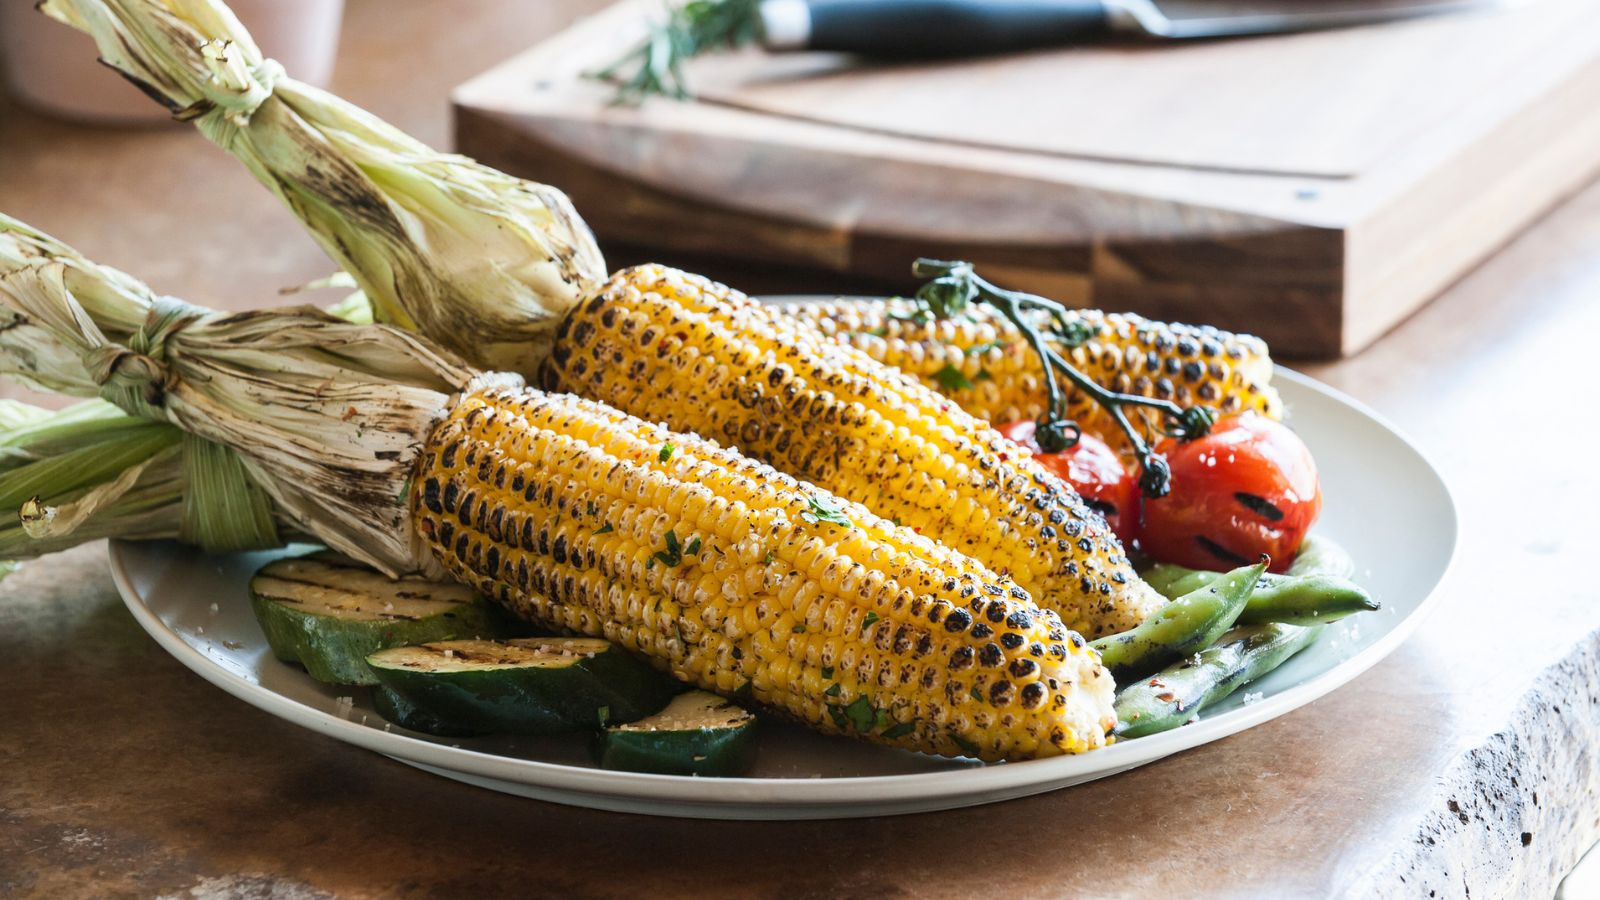 How to grill corn on the cob - 4 recipes from an expert